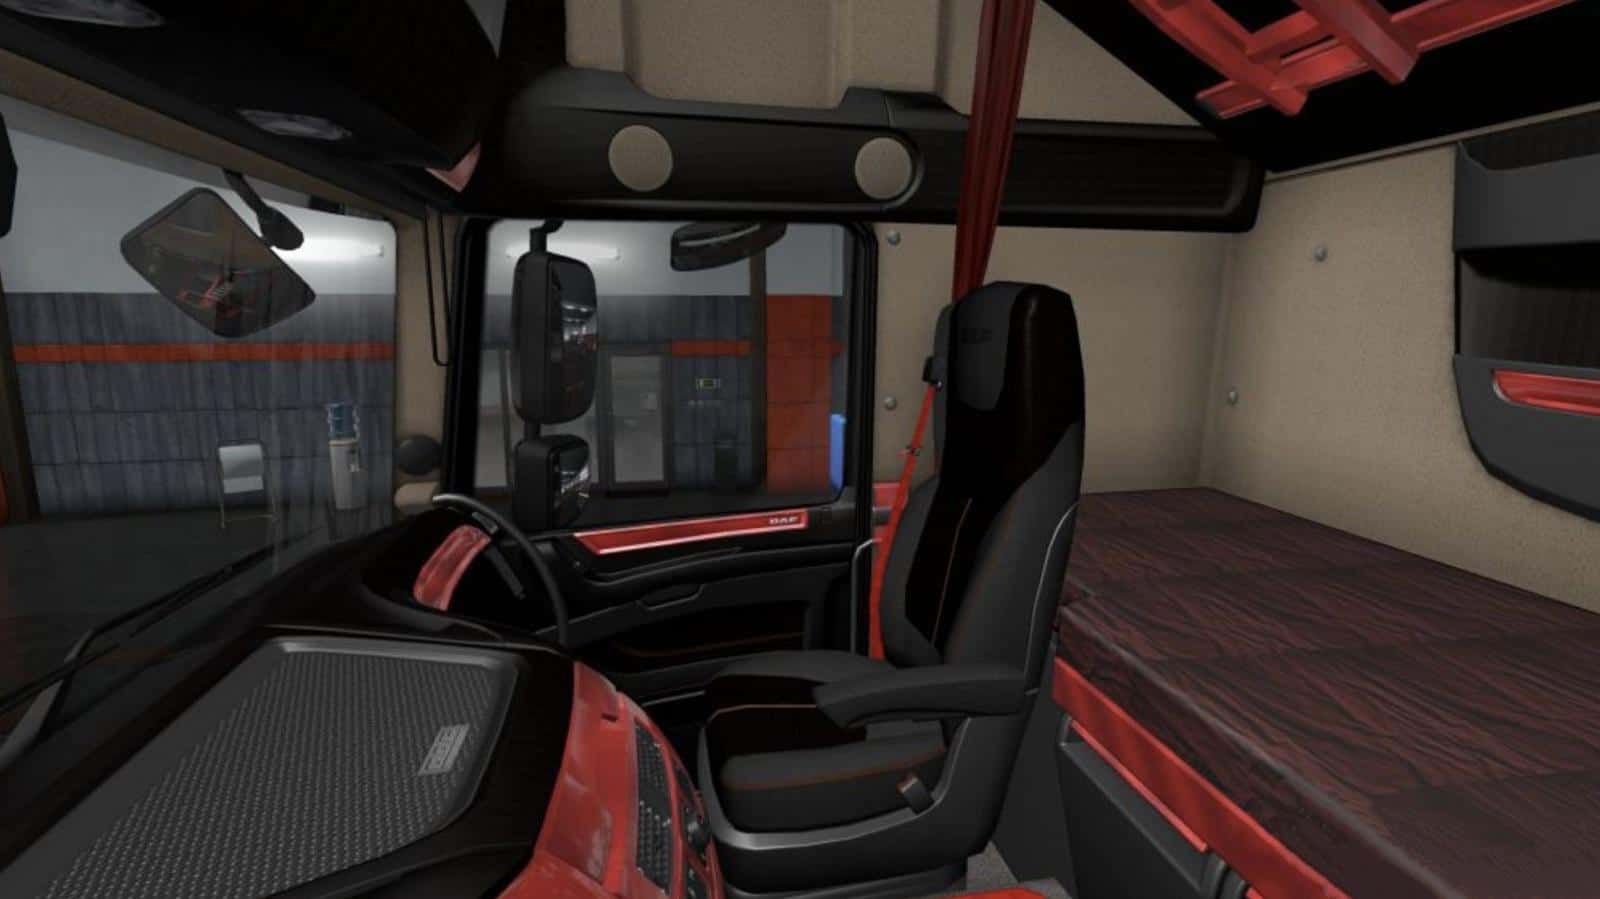 Daf E6 Red Wood Interior 1 36 X Ets2 American Truck